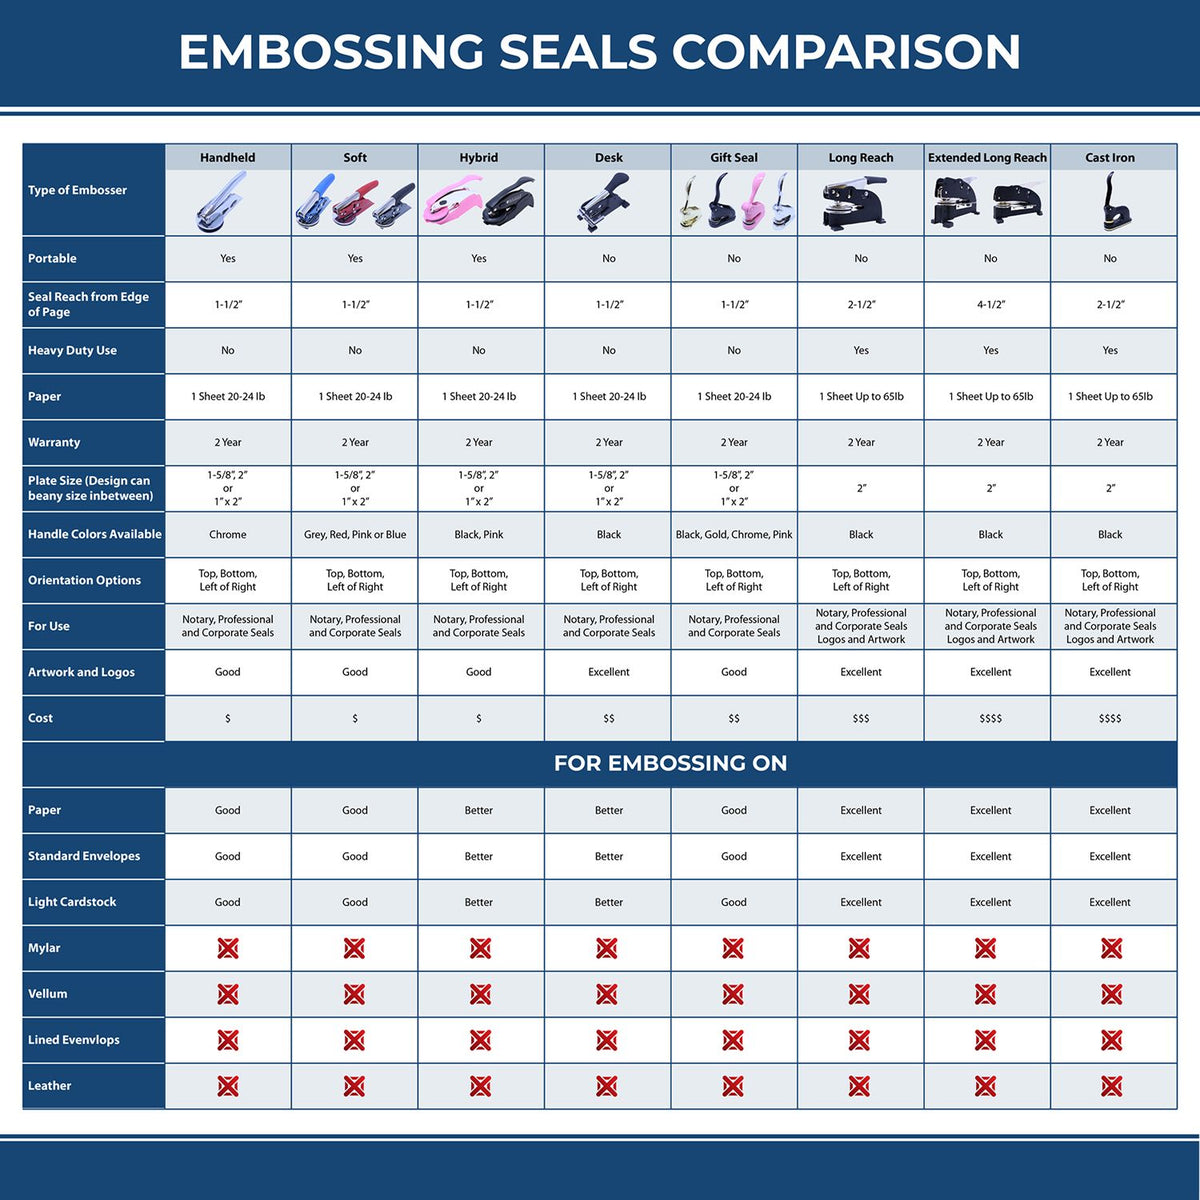 A comparison chart for the different types of mount models available for the State of New Mexico Long Reach Architectural Embossing Seal.